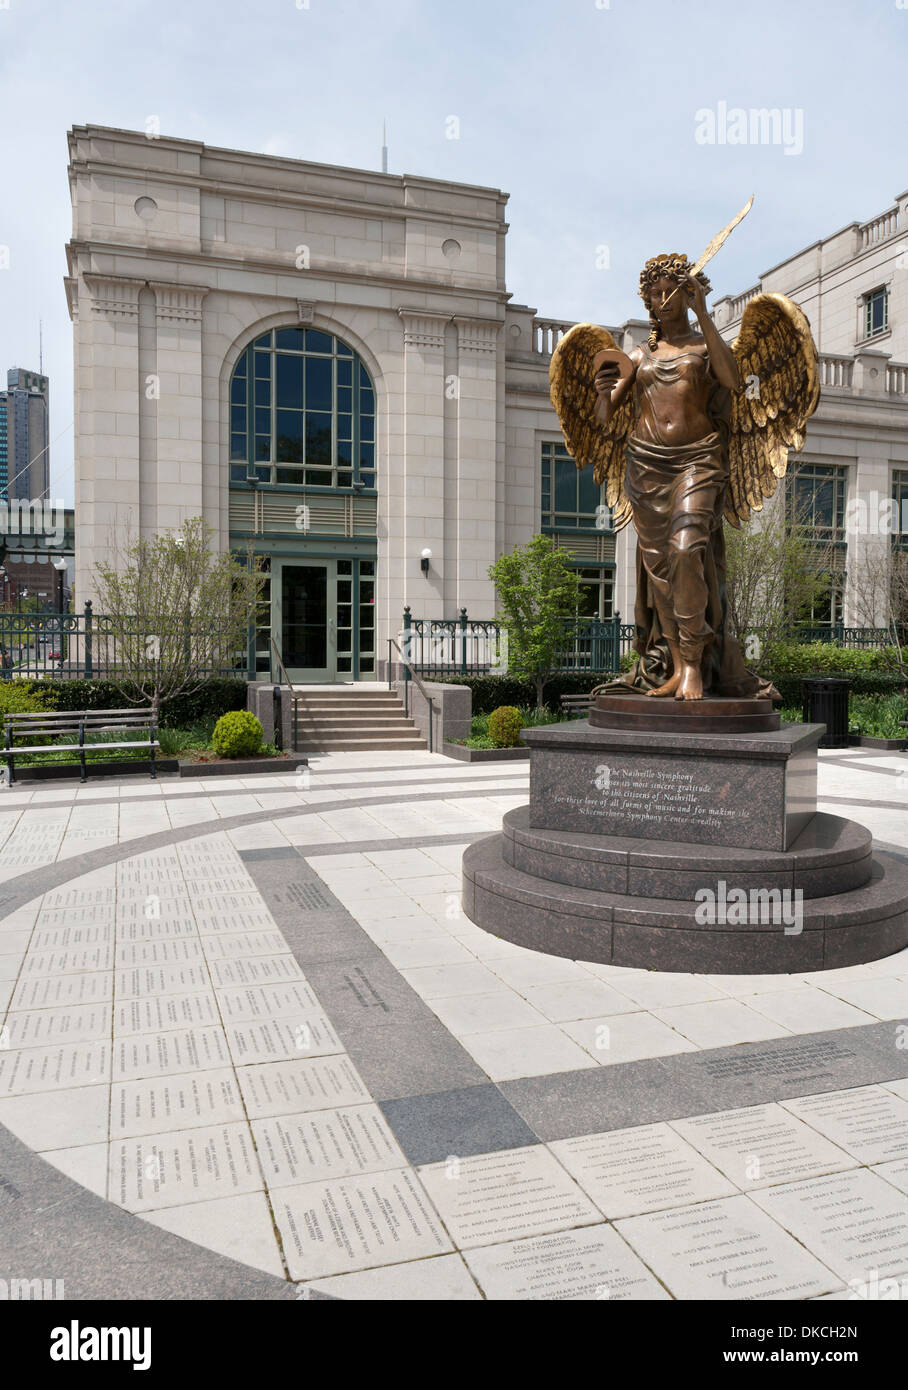 The exterior of the Schermerhorn Symphony Hall Nashville, TN and the statue outside. Stock Photo